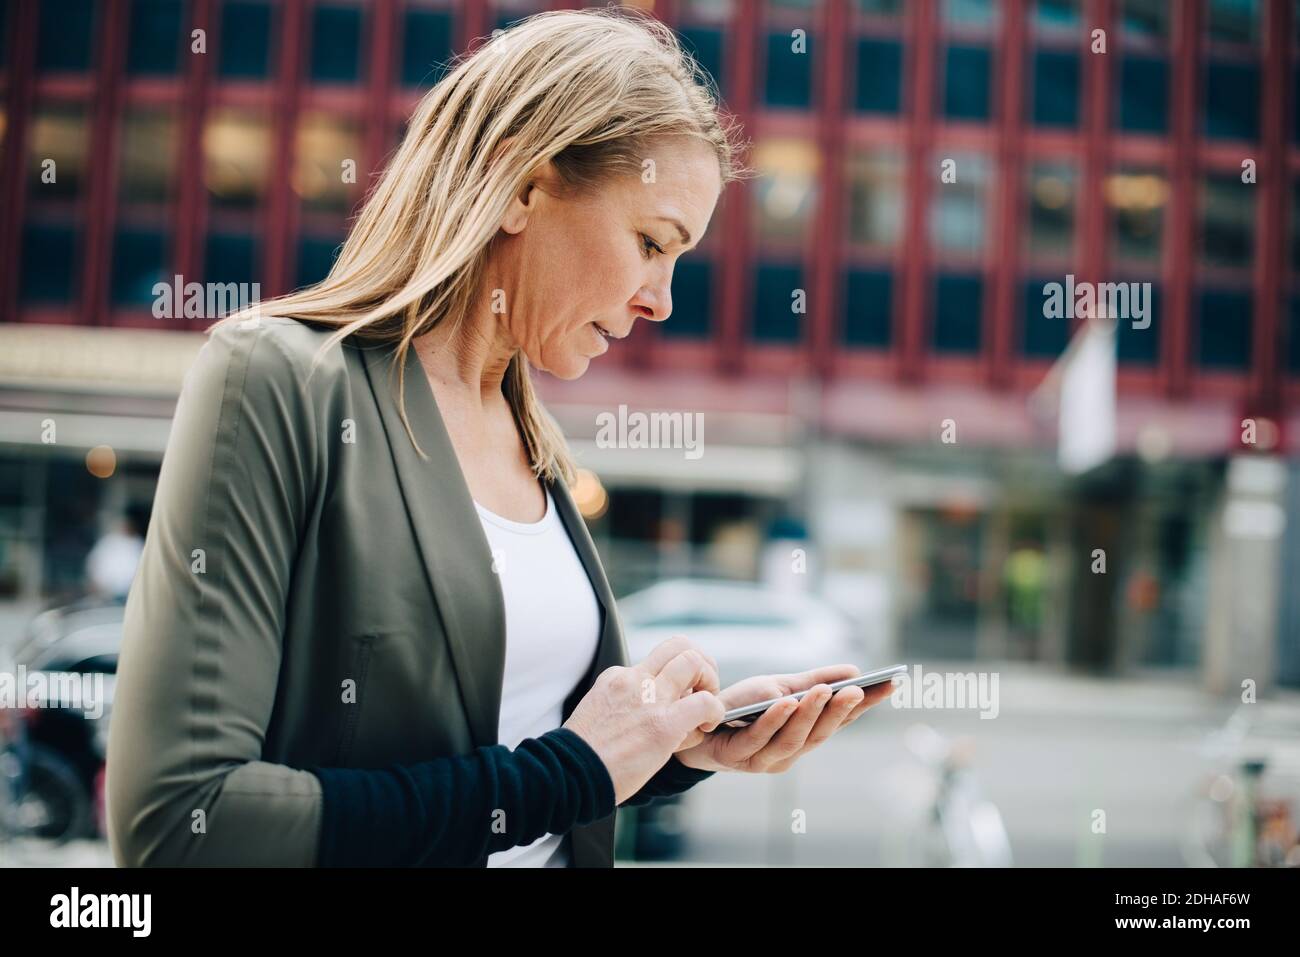 Blond mature businesswoman using smart phone against building in city Stock Photo